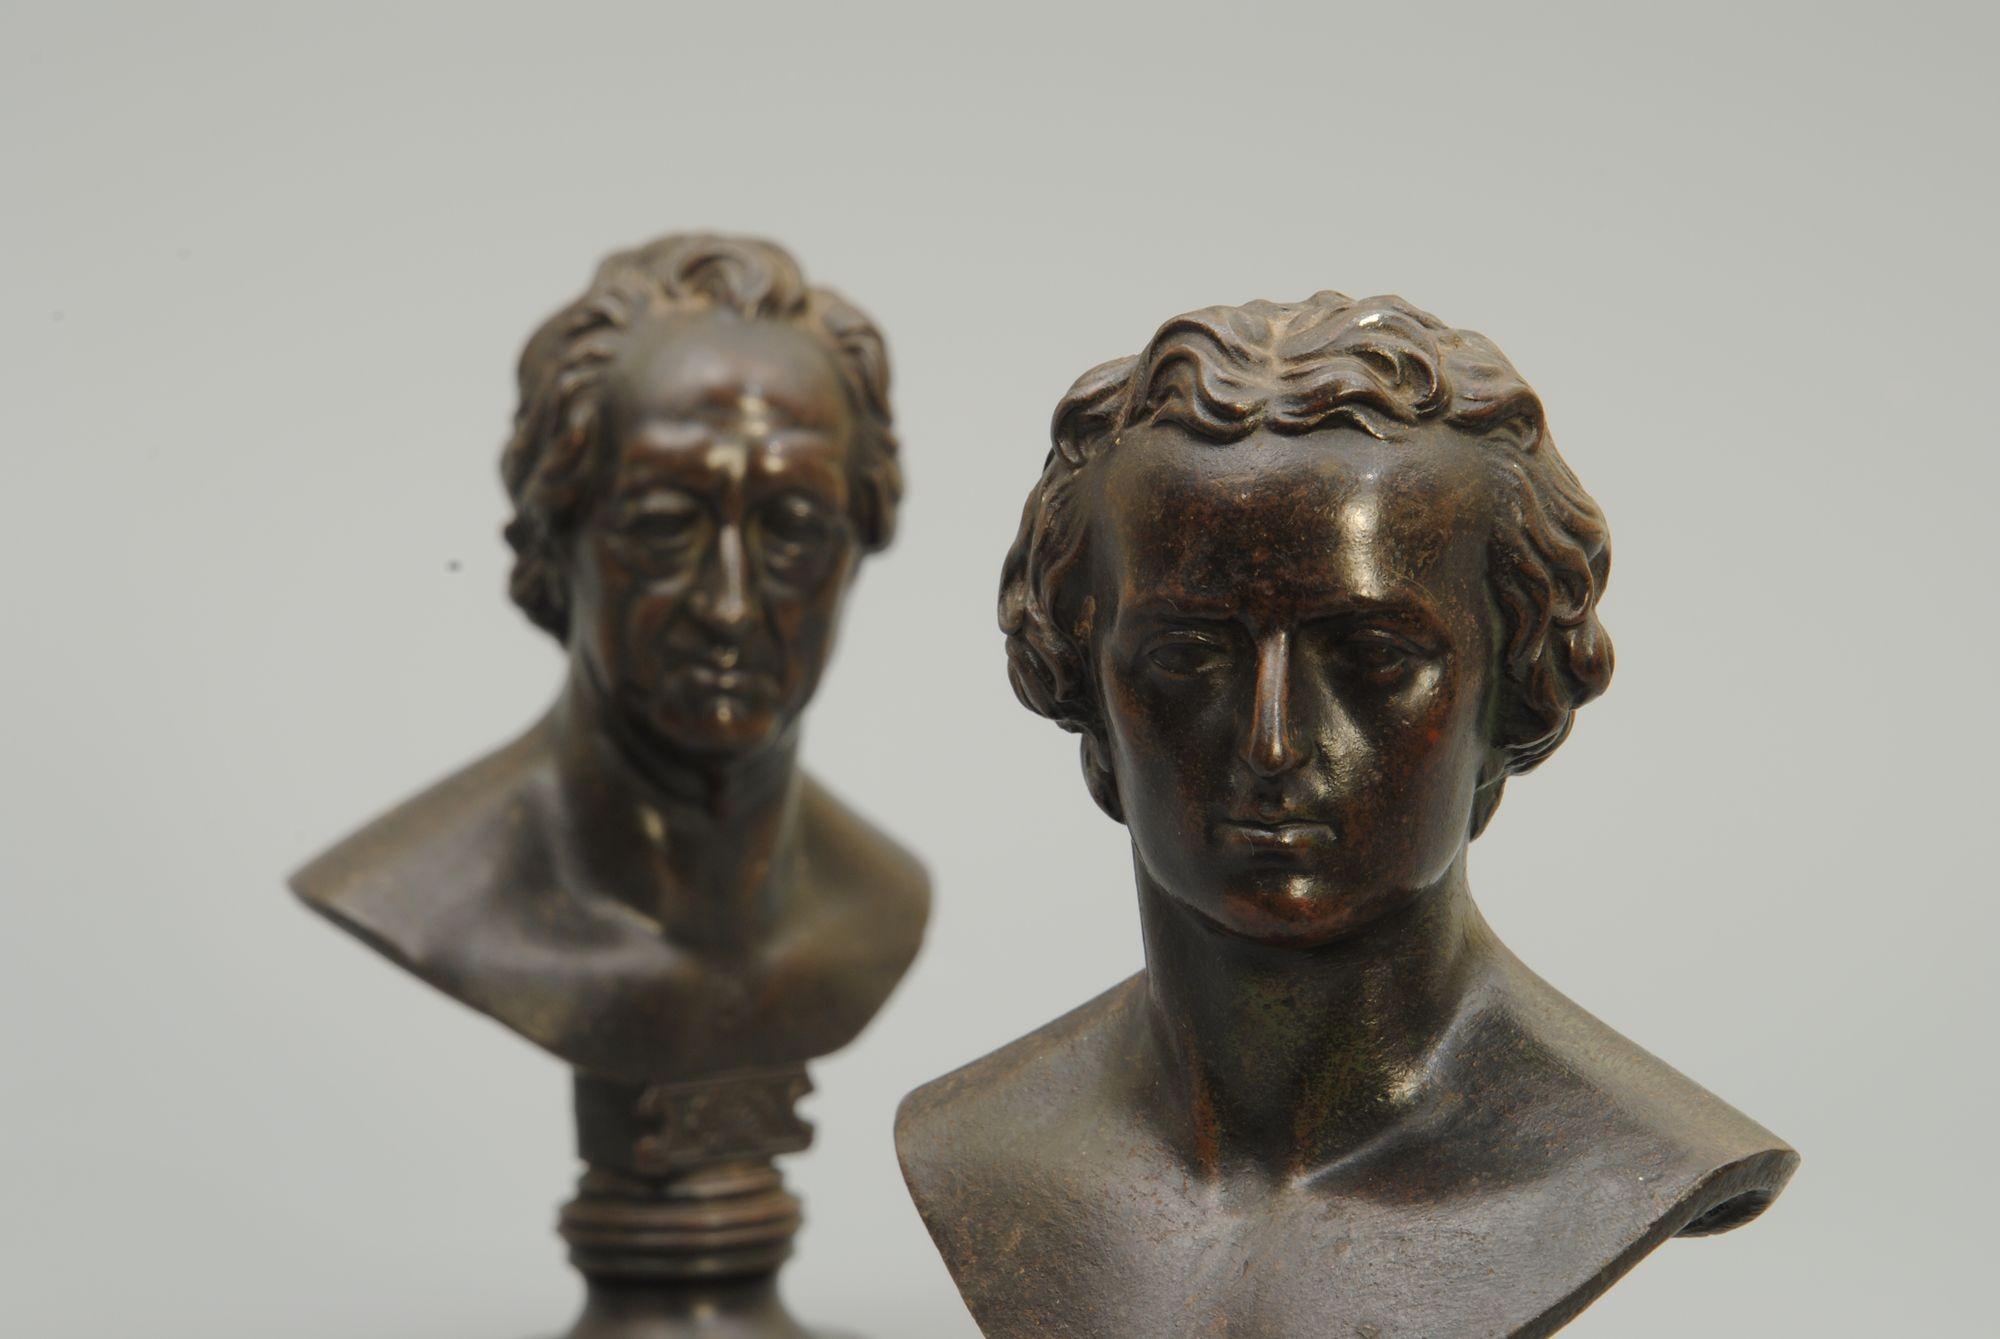 A signed pair of portrait busts of Johann Wolfgang von Goethe and Friedrich Schiller by Posch.
Leonard Posch, Austrian 1750- 1831, produced these fine quality portrait busts and medallions in cast iron in Berlin in the early 19th century.